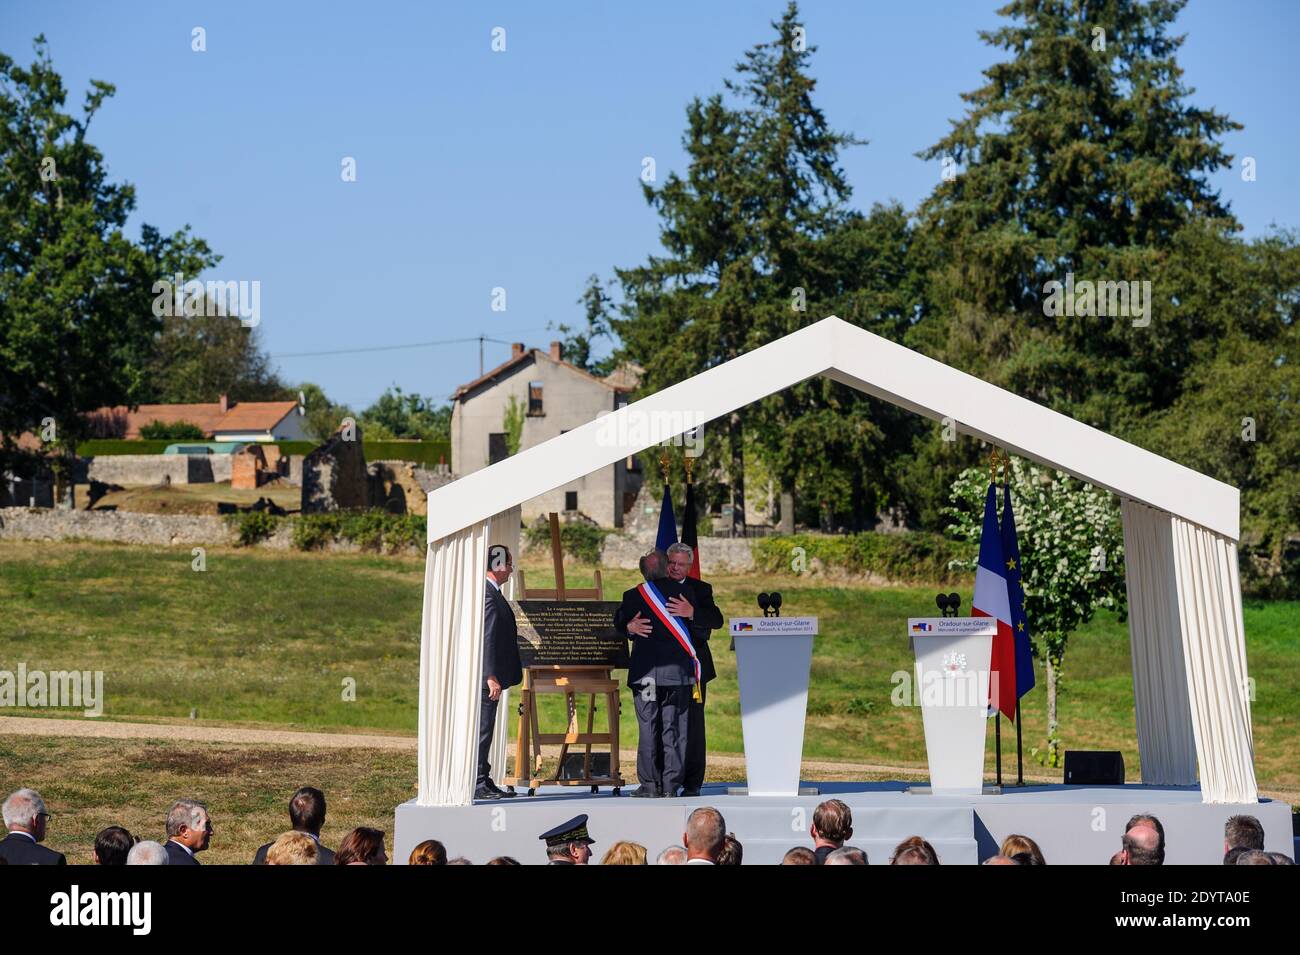 French President Francois Hollande and German President Joachim Gauck are pictured at the memorial site in Oradour-sur-Glane, France on September 4, 2013. A unit of SS officers murdered 642 citizens of the town during World War II in June 1944. The German President is on a three-day visit to France. Photo by Christophe Petit Tesson/Pool/ABACAPRESS.COM Stock Photo